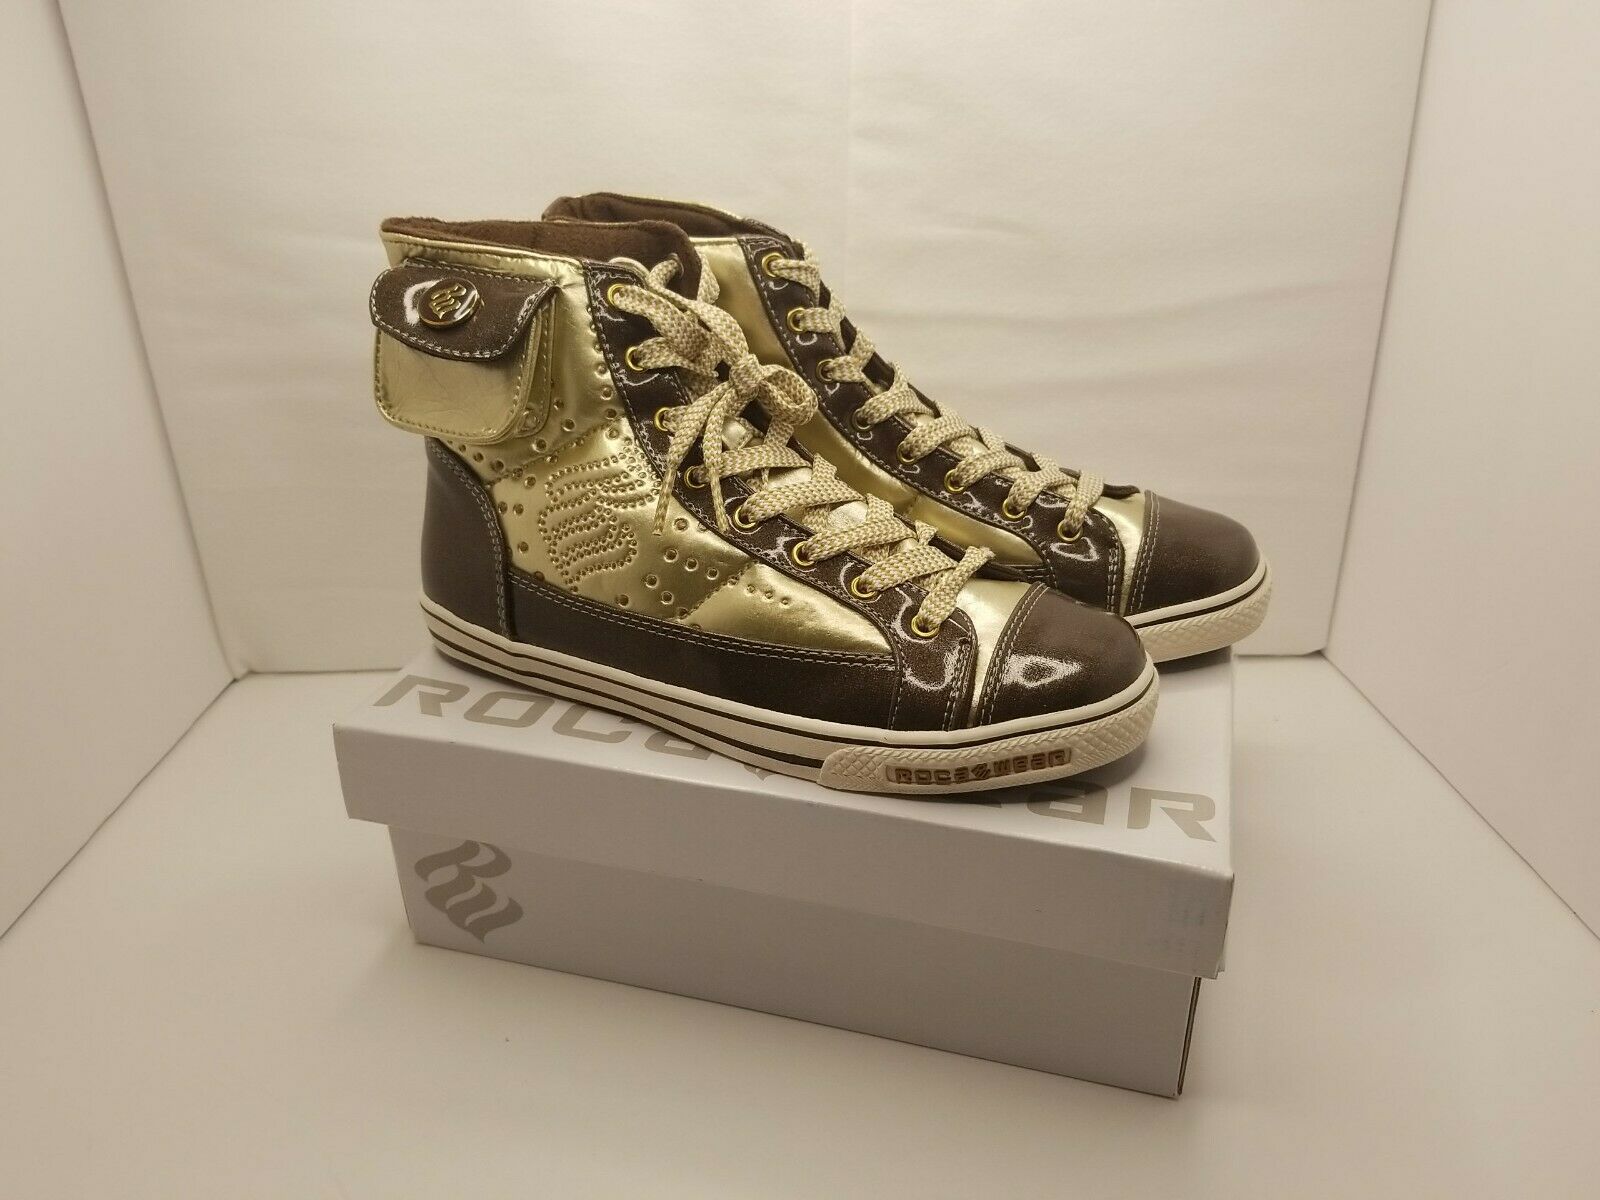 RocaWear mixer White/Gold Fashion Casual Hi Top Shoes Youth Size 4 NEW